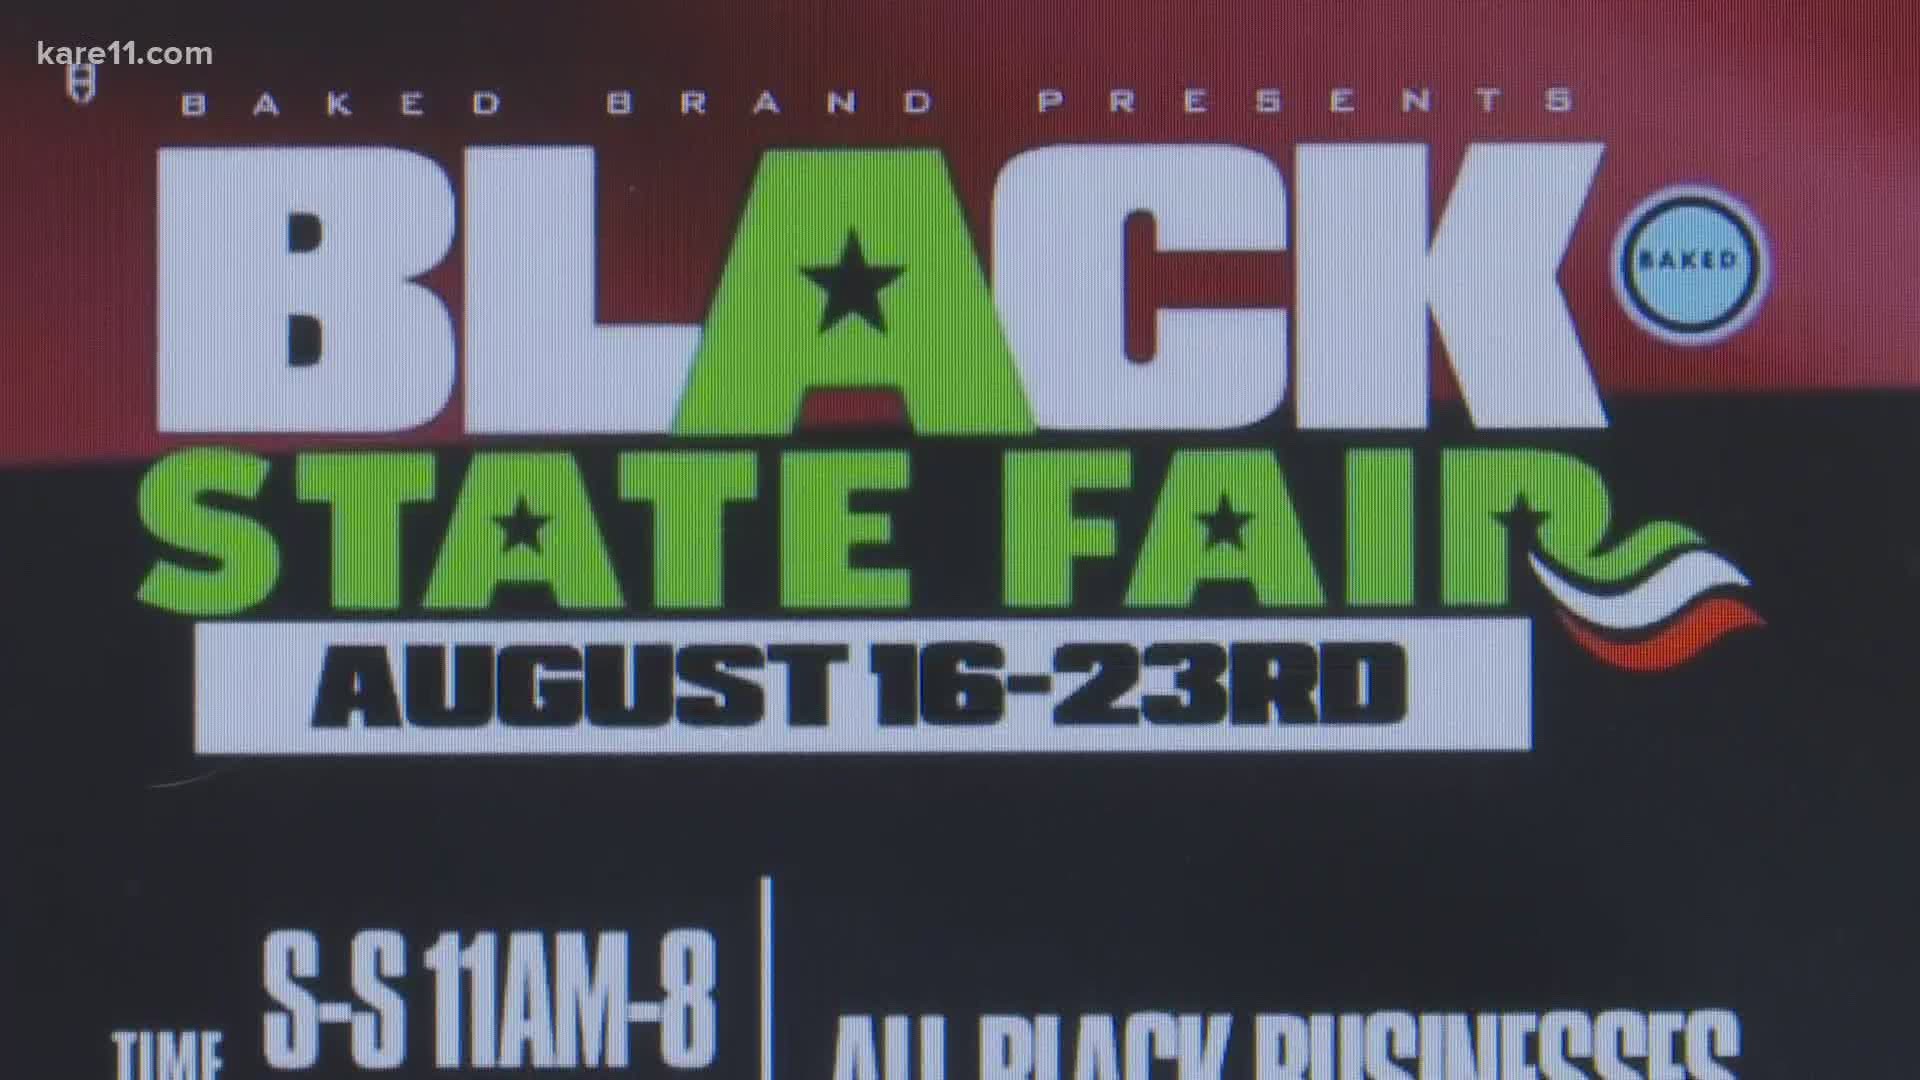 Black State Fair in Minnesota met with mixed reaction online